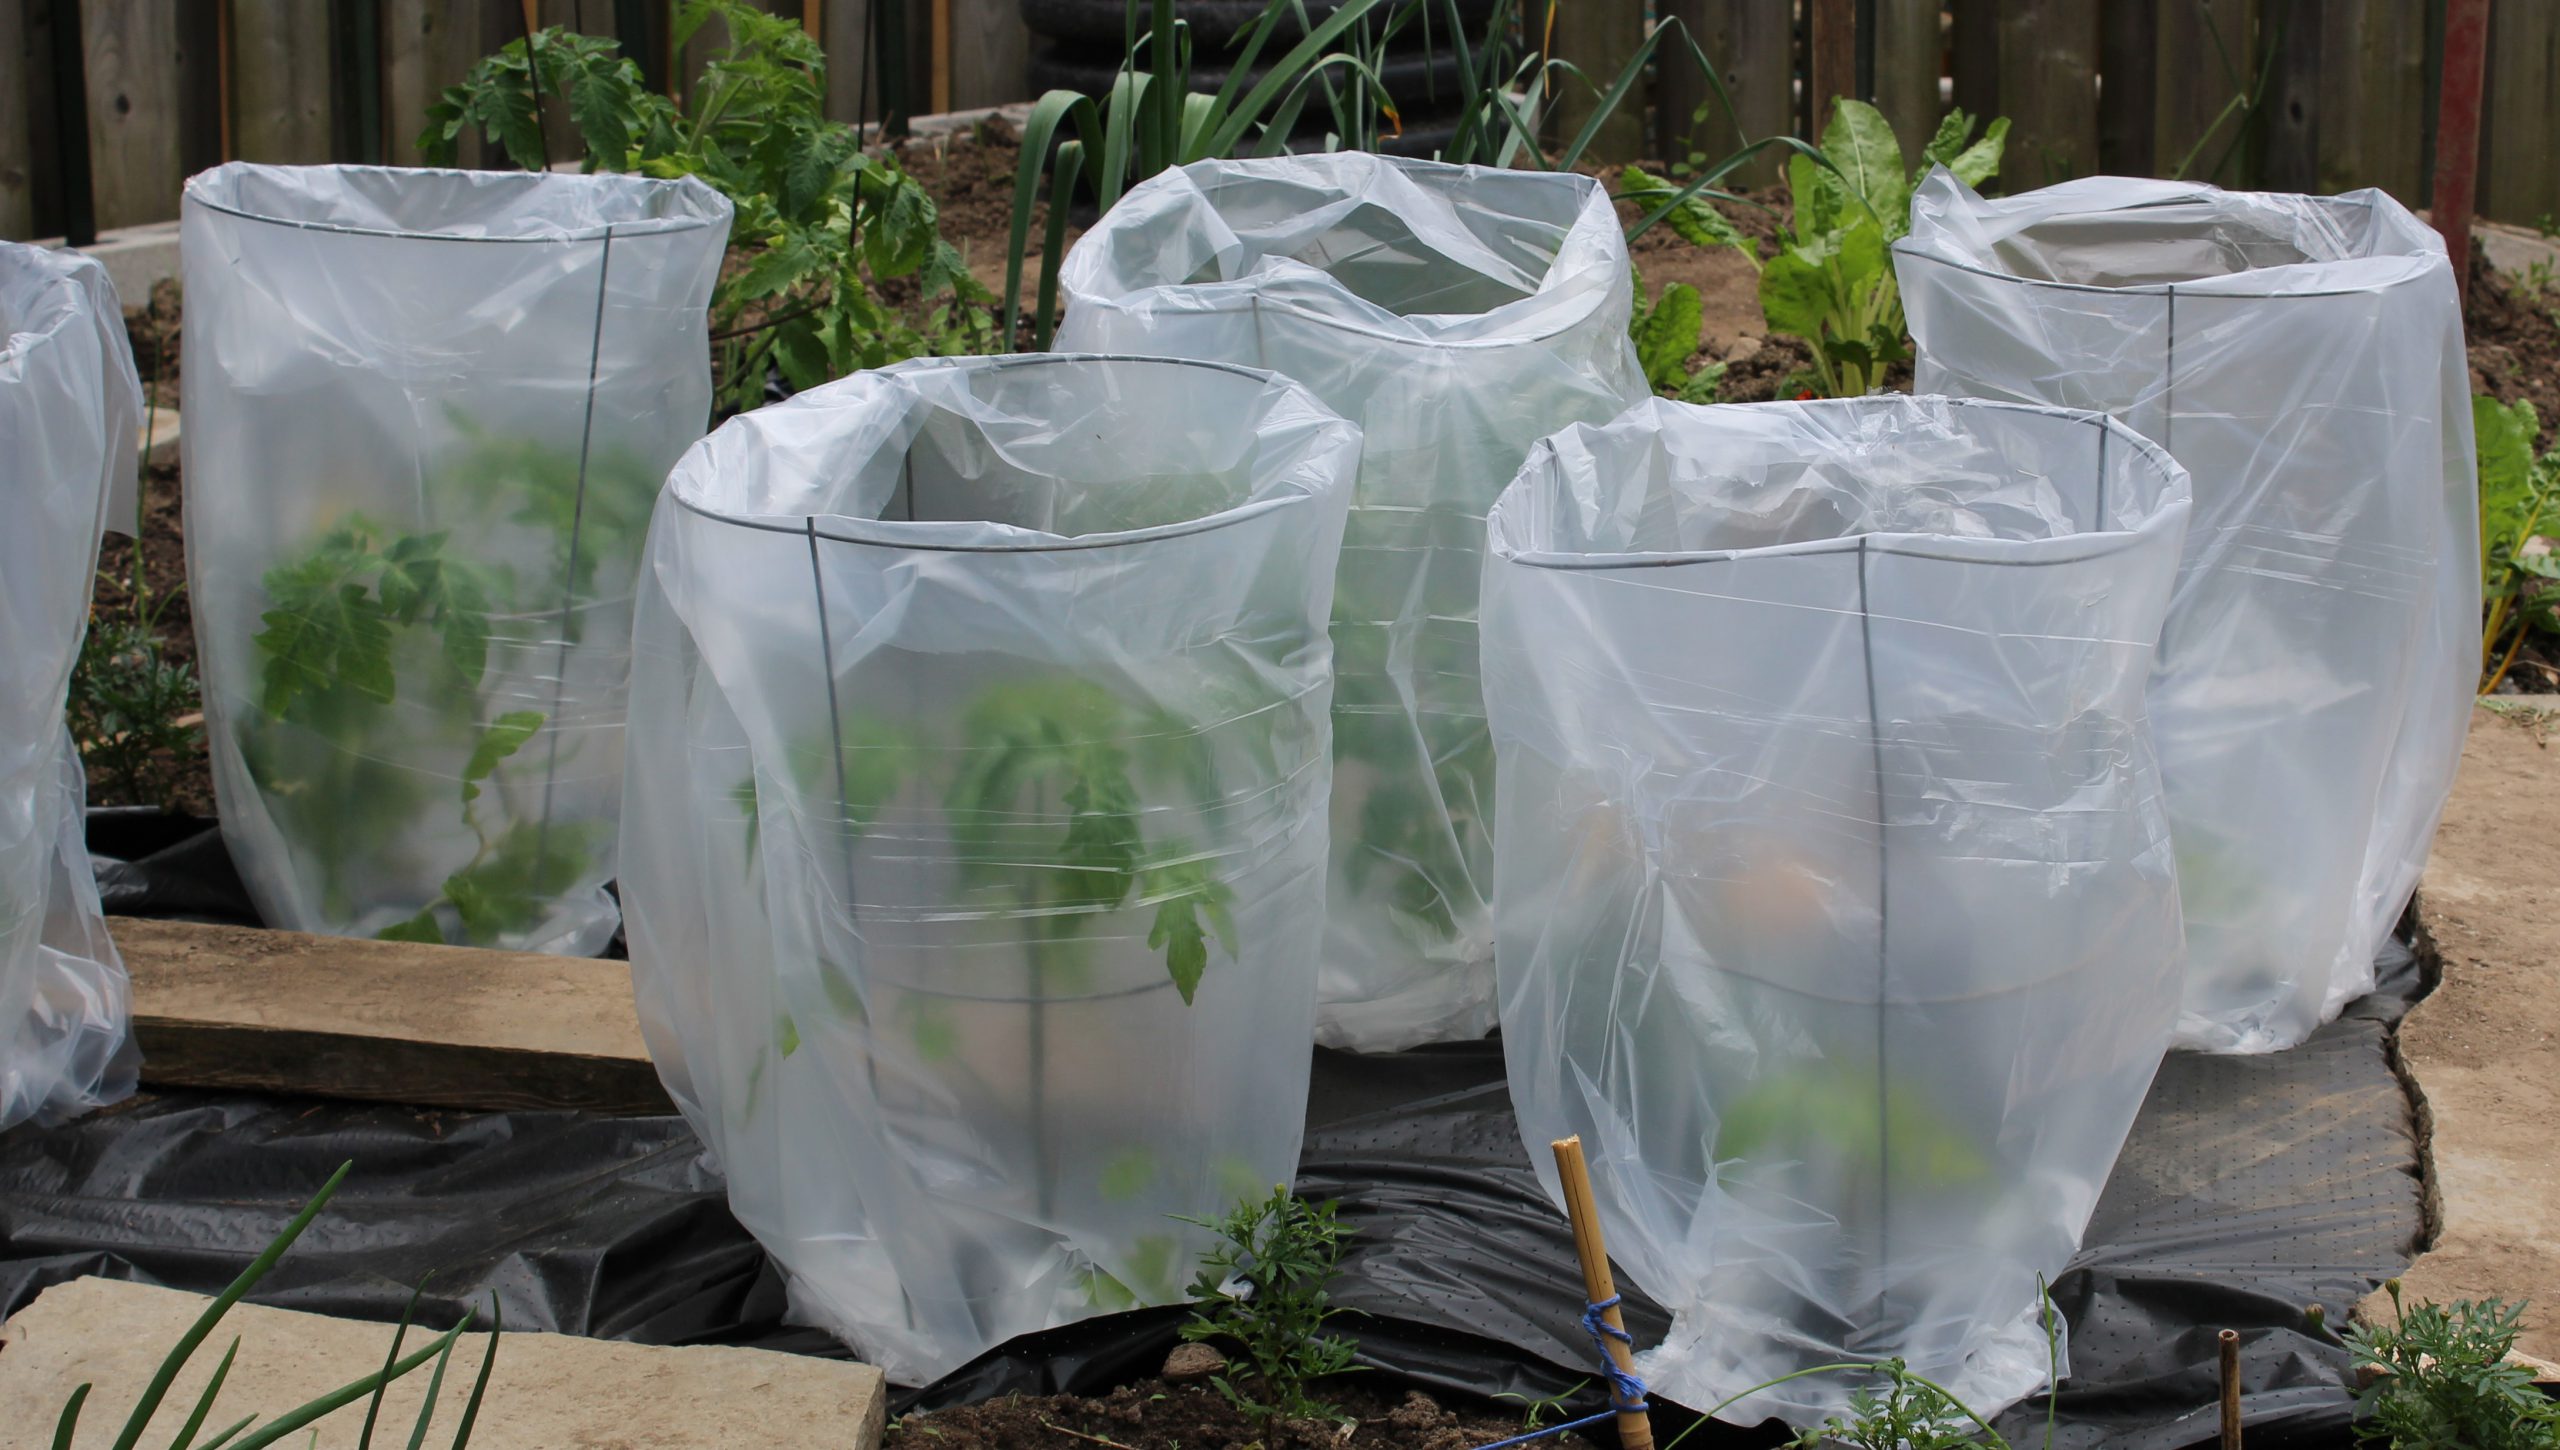 Tomato greenhouses made with tomato cages and plastic